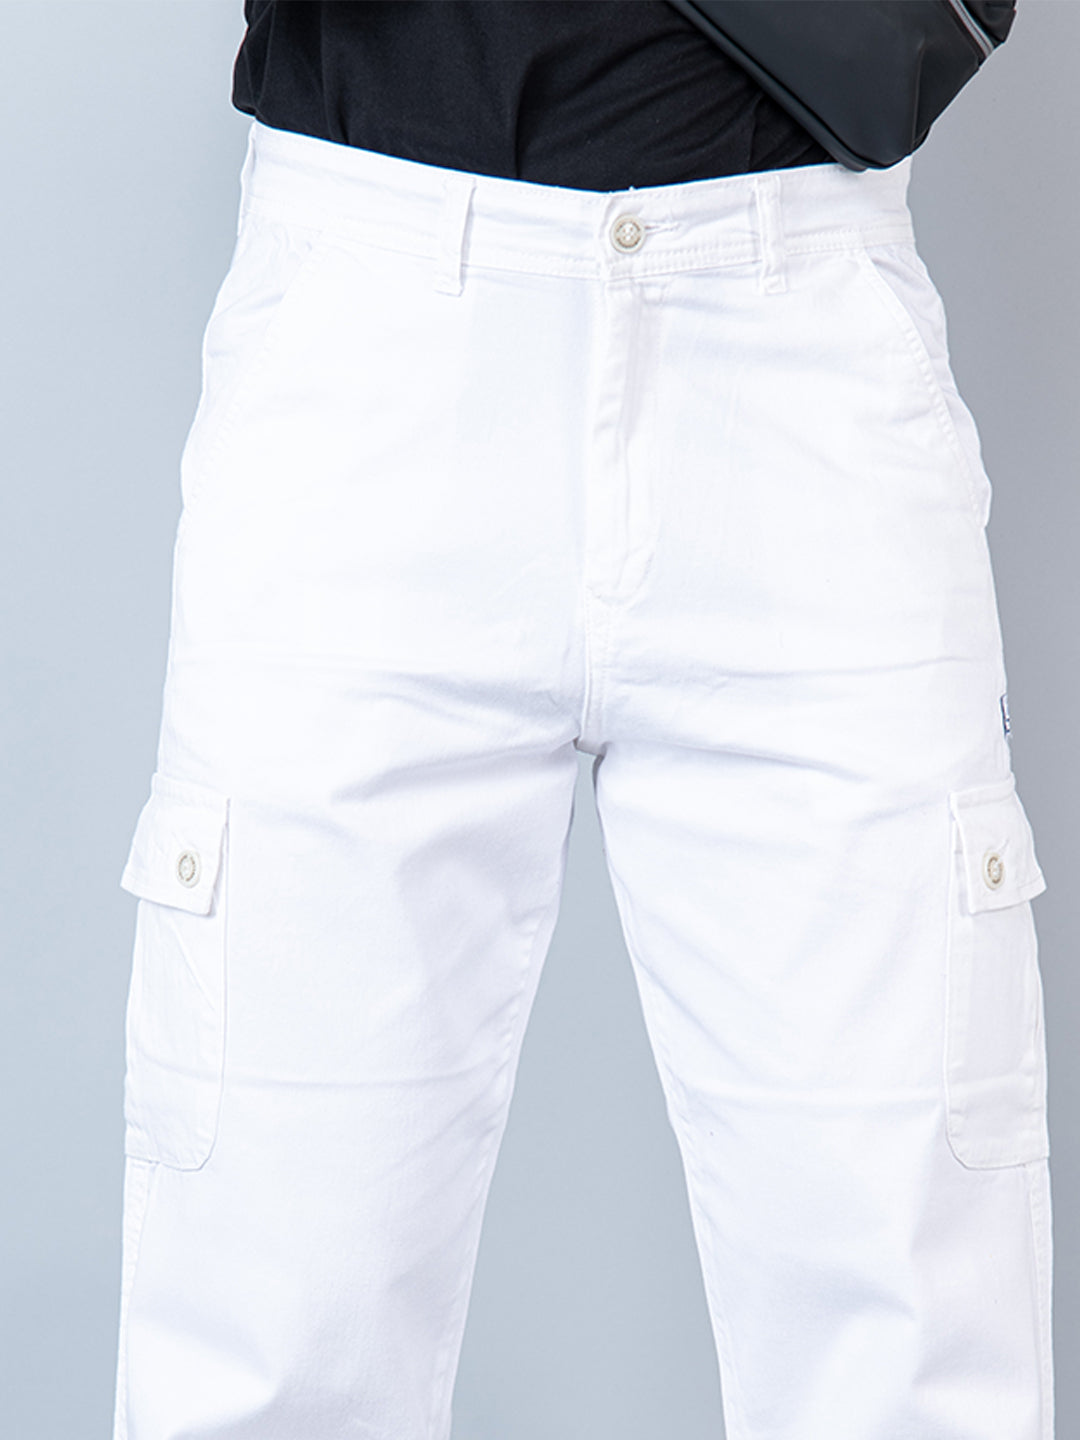 Buy White Baggy Fit Chinos Cotton Cargo Pants Online At Best Prices   Tistabene